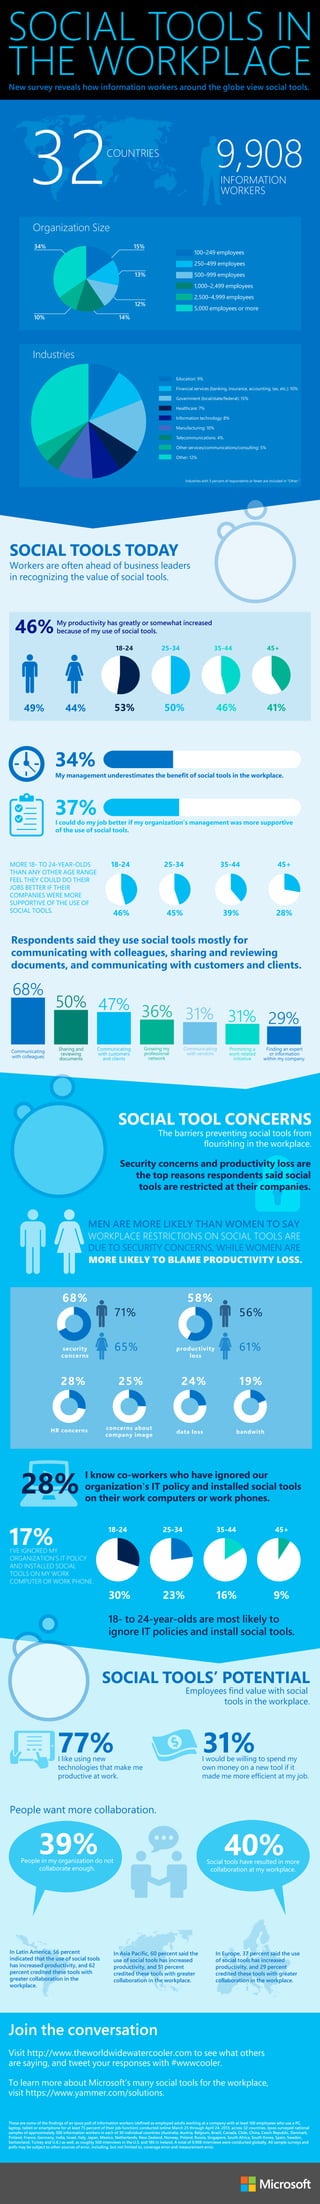 SOCIAL TOOLS IN
THE WORKPLACE
New survey reveals how information workers around the globe view social tools.

32

9,908

COUNTRIES

INFORMATION
WORKERS

Organization Size
15%

34%

100–249 employees
250–499 employees

13%

500–999 employees
1,000–2,499 employees
2,500–4,999 employees

12%
10%

5,000 employees or more

14%

Industries
Education: 9%
Financial services (banking, insurance, accounting, tax, etc.): 10%
Government (local/state/federal): 15%
Healthcare: 7%
Information technology: 8%
Manufacturing: 10%
Telecommunications: 4%
Other services/communications/consulting: 5%
Other: 12%

Industries with 3 percent of respondents or fewer are included in "Other."

SOCIAL TOOLS TODAY

Workers are often ahead of business leaders
in recognizing the value of social tools.

46%

My productivity has greatly or somewhat increased
because of my use of social tools.
18-24

49%

25-34

53%

44%

35-44

50%

45+

46%

41%

My management underestimates the benefit of social tools in the workplace.

I could do my job better if my organization’s management was more supportive
of the use of social tools.

18-24

25-34

35-44

45+

46%

MORE 18- TO 24-YEAR-OLDS
THAN ANY OTHER AGE RANGE
FEEL THEY COULD DO THEIR
JOBS BETTER IF THEIR
COMPANIES WERE MORE
SUPPORTIVE OF THE USE OF
SOCIAL TOOLS.

45%

39%

28%

Respondents said they use social tools mostly for
communicating with colleagues, sharing and reviewing
documents, and communicating with customers and clients.

68%

50% 47%
36% 31% 31% 29%
Sharing and
reviewing
documents

Communicating
with colleagues

Communicating
with customers
and clients

Growing my
professional
network

Communicating
with vendors

Promoting a
work-related
initiative

Finding an expert
or information
within my company.

SOCIAL TOOL CONCERNS
The barriers preventing social tools from
flourishing in the workplace.

Security concerns and productivity loss are
the top reasons respondents said social
tools are restricted at their companies.

MEN ARE MORE LIKELY THAN WOMEN TO SAY
WORKPLACE RESTRICTIONS ON SOCIAL TOOLS ARE
DUE TO SECURITY CONCERNS, WHILE WOMEN ARE

MORE LIKELY TO BLAME PRODUCTIVITY LOSS.

68%

71%
65%

security
concerns

28%

HR concerns

28%

58%

25%

concerns about
company image

56%
61%

productivity
loss

24%

19%

data loss

bandwith

I know co-workers who have ignored our
organization's IT policy and installed social tools
on their work computers or work phones.

17%

18-24

25-34

35-44

45+

30%

23%

16%

9%

I’VE IGNORED MY
ORGANIZATION'S IT POLICY
AND INSTALLED SOCIAL
TOOLS ON MY WORK
COMPUTER OR WORK PHONE.

18- to 24-year-olds are most likely to
ignore IT policies and install social tools.

SOCIAL TOOLS’ POTENTIAL
Employees find value with social
tools in the workplace.

77%

I like using new
technologies that make me
productive at work.

31%

I would be willing to spend my
own money on a new tool if it
made me more efficient at my job.

People want more collaboration.

39%

40%

People in my organization do not
collaborate enough.

In Latin America, 56 percent
indicated that the use of social tools
has increased productivity, and 62
percent credited these tools with
greater collaboration in the
workplace.

Social tools have resulted in more
collaboration at my workplace.

In Asia Pacific, 60 percent said the
use of social tools has increased
productivity, and 51 percent
credited these tools with greater
collaboration in the workplace.

In Europe, 37 percent said the use
of social tools has increased
productivity, and 29 percent
credited these tools with greater
collaboration in the workplace.

Join the conversation
Visit http://www.theworldwidewatercooler.com to see what others
are saying, and tweet your responses with #wwwcooler.
To learn more about Microsoft’s many social tools for the workplace,
visit https://www.yammer.com/solutions.

These are some of the findings of an Ipsos poll of information workers (defined as employed adults working at a company with at least 100 employees who use a PC,
laptop, tablet or smartphone for at least 75 percent of their job function) conducted online March 25 through April 24, 2013, across 32 countries. Ipsos surveyed national
samples of approximately 300 information workers in each of 30 individual countries (Australia, Austria, Belgium, Brazil, Canada, Chile, China, Czech Republic, Denmark,
Finland, France, Germany, India, Israel, Italy, Japan, Mexico, Netherlands, New Zealand, Norway, Poland, Russia, Singapore, South Africa, South Korea, Spain, Sweden,
Switzerland, Turkey and U.K.) as well, as roughly 500 interviews in the U.S. and 180 in Ireland. A total of 9,908 interviews were conducted globally. All sample surveys and
polls may be subject to other sources of error, including, but not limited to, coverage error and measurement error.

The
Worldwide
Water Cooler

 